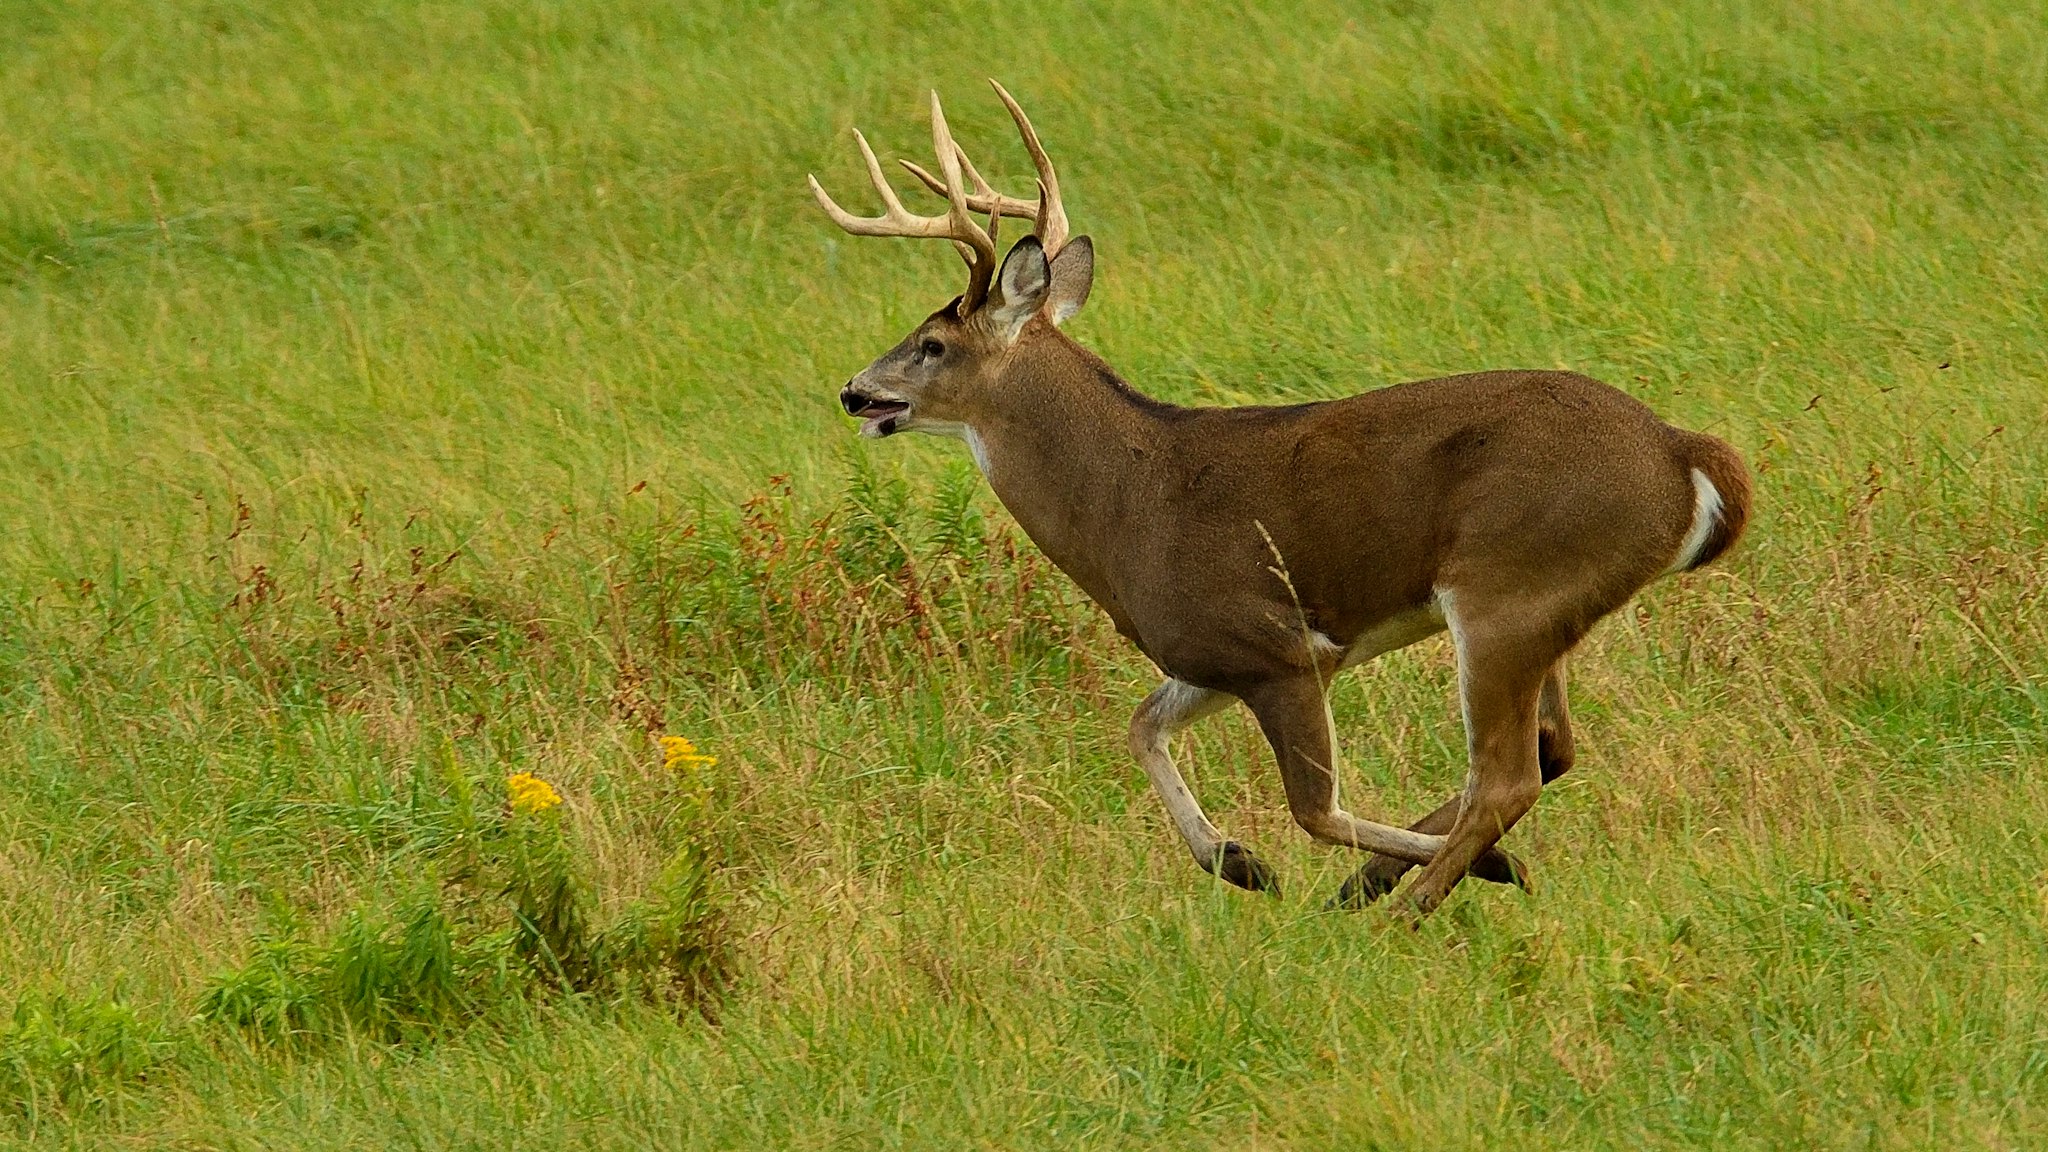 A big 8 point whitetail buck running through a grass field in South central Pennsylvania.